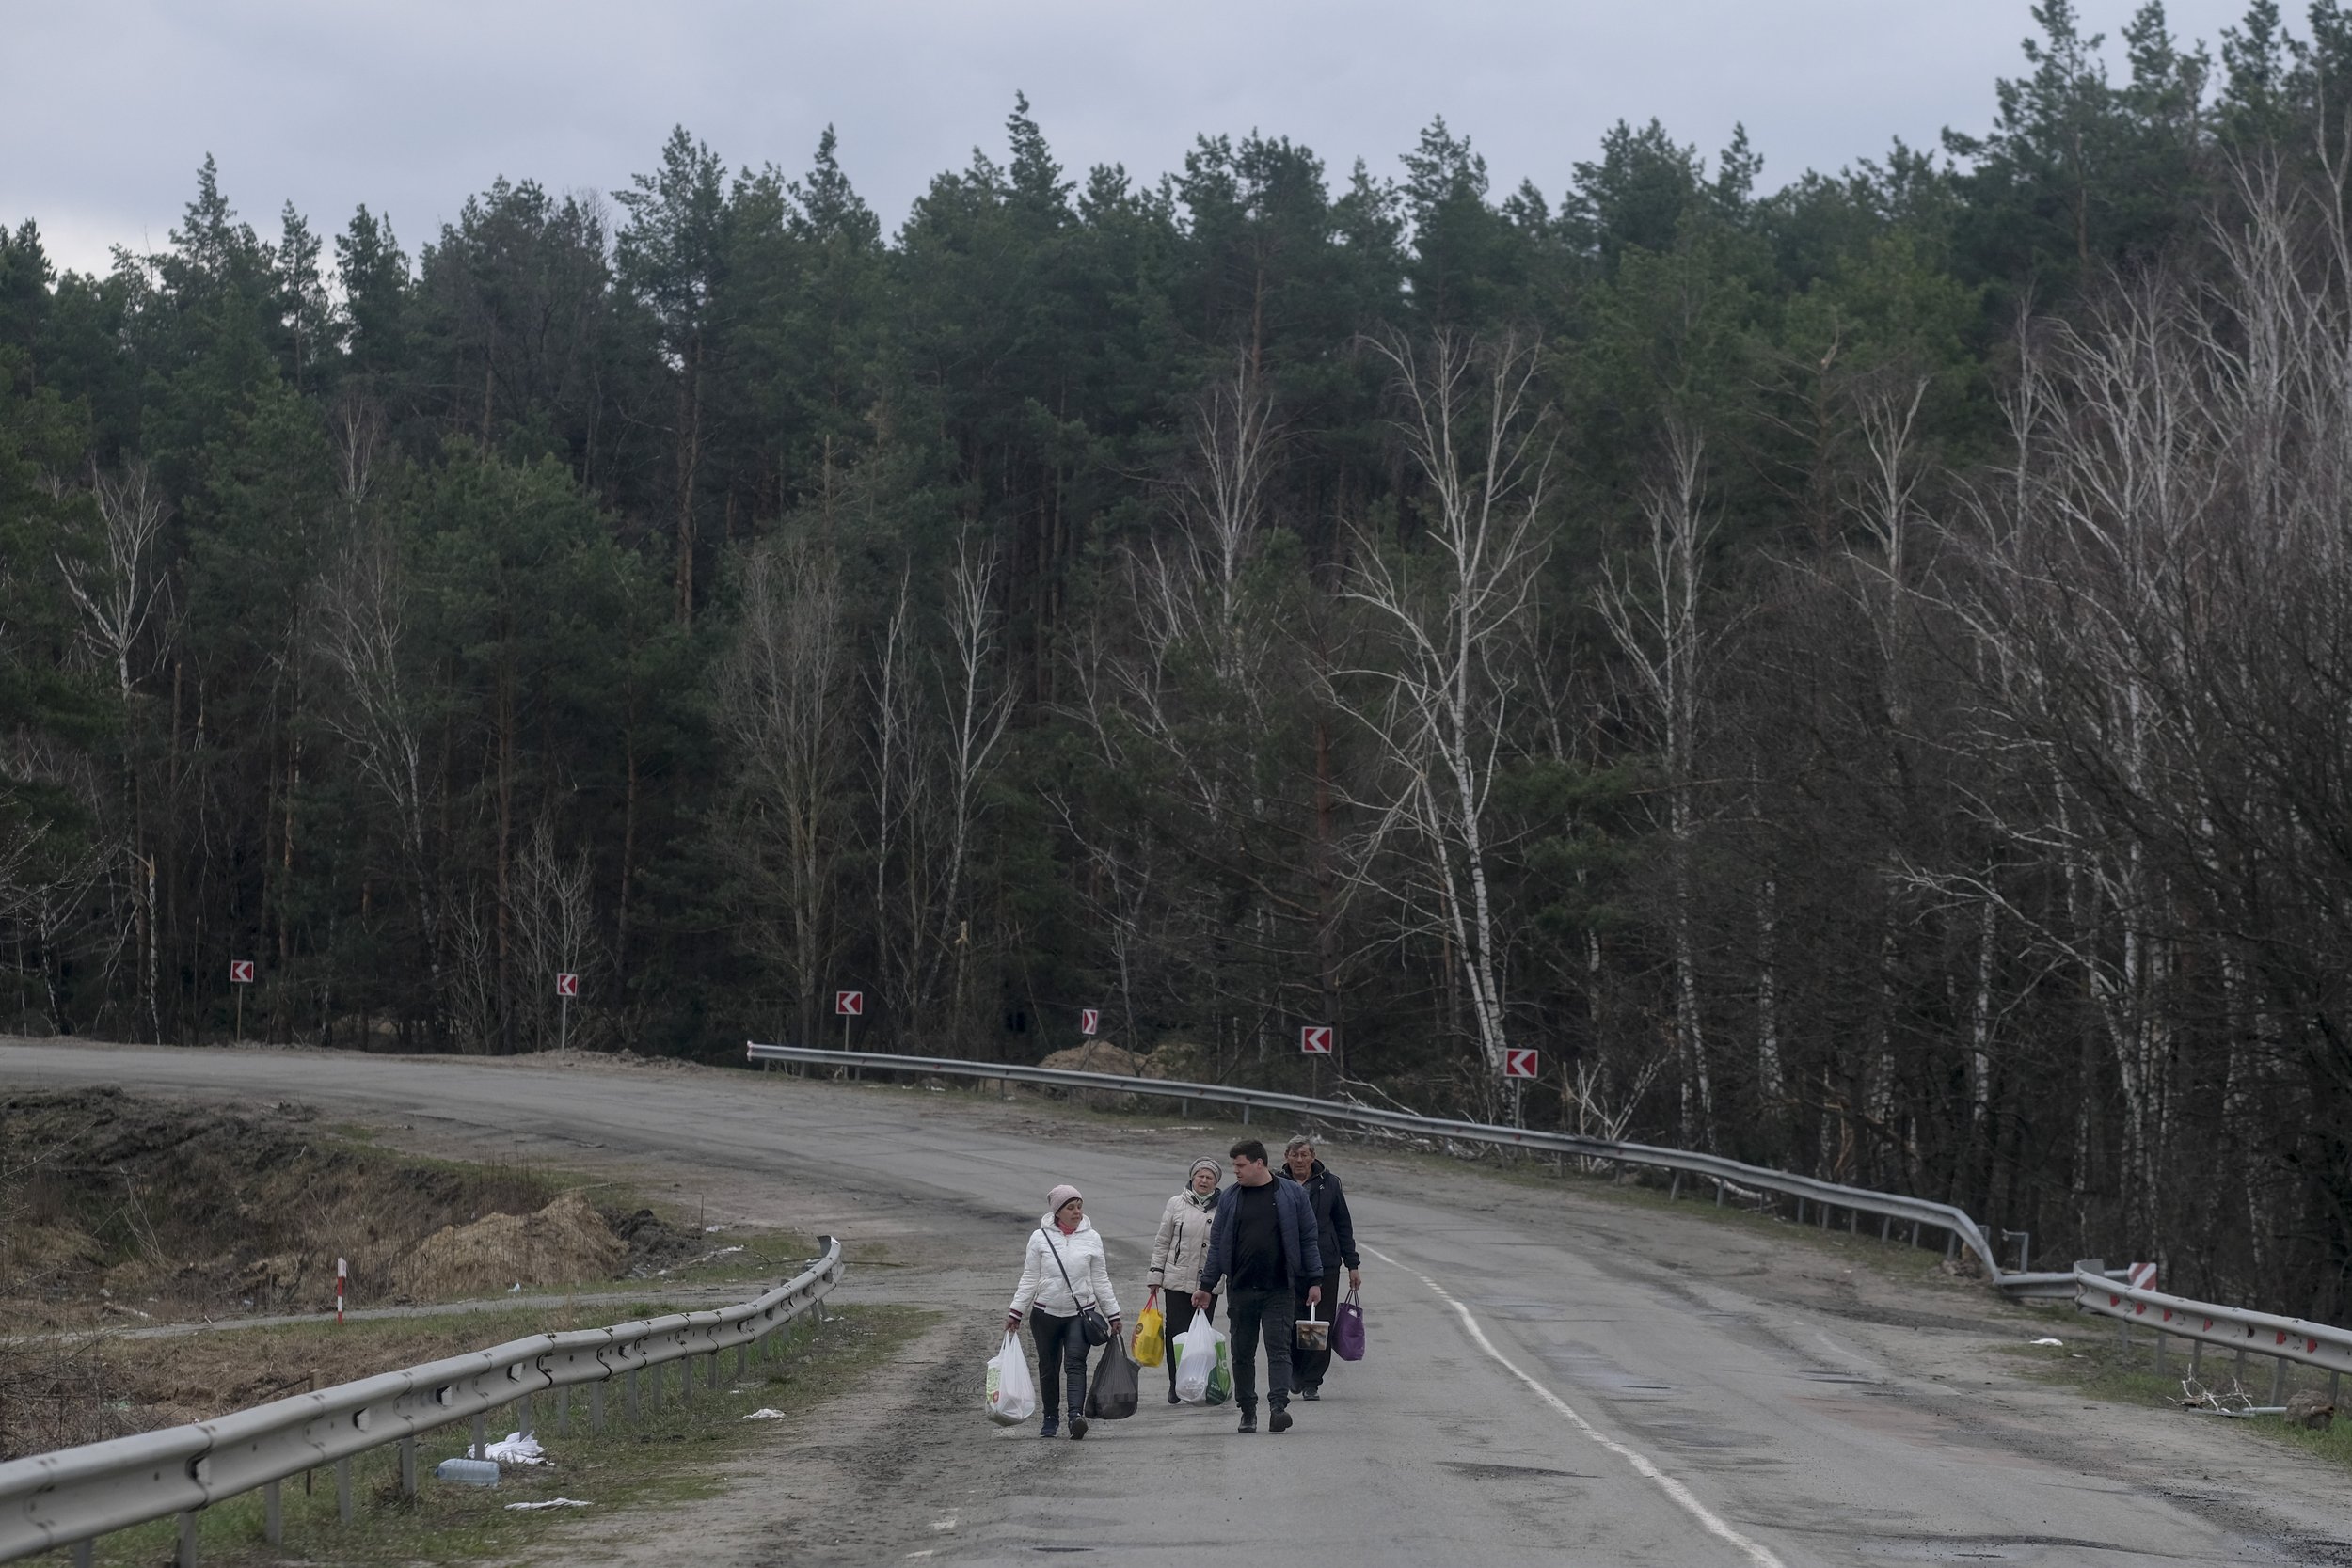  Civilians walk the long road towards Demydiv following Russian troops’ retreat back to Belarus on April 5, 2022. After Russian forces pulled out of Kyiv Oblast, Ukrainian civilians began to return to the homes they had fled at the outbreak of the in